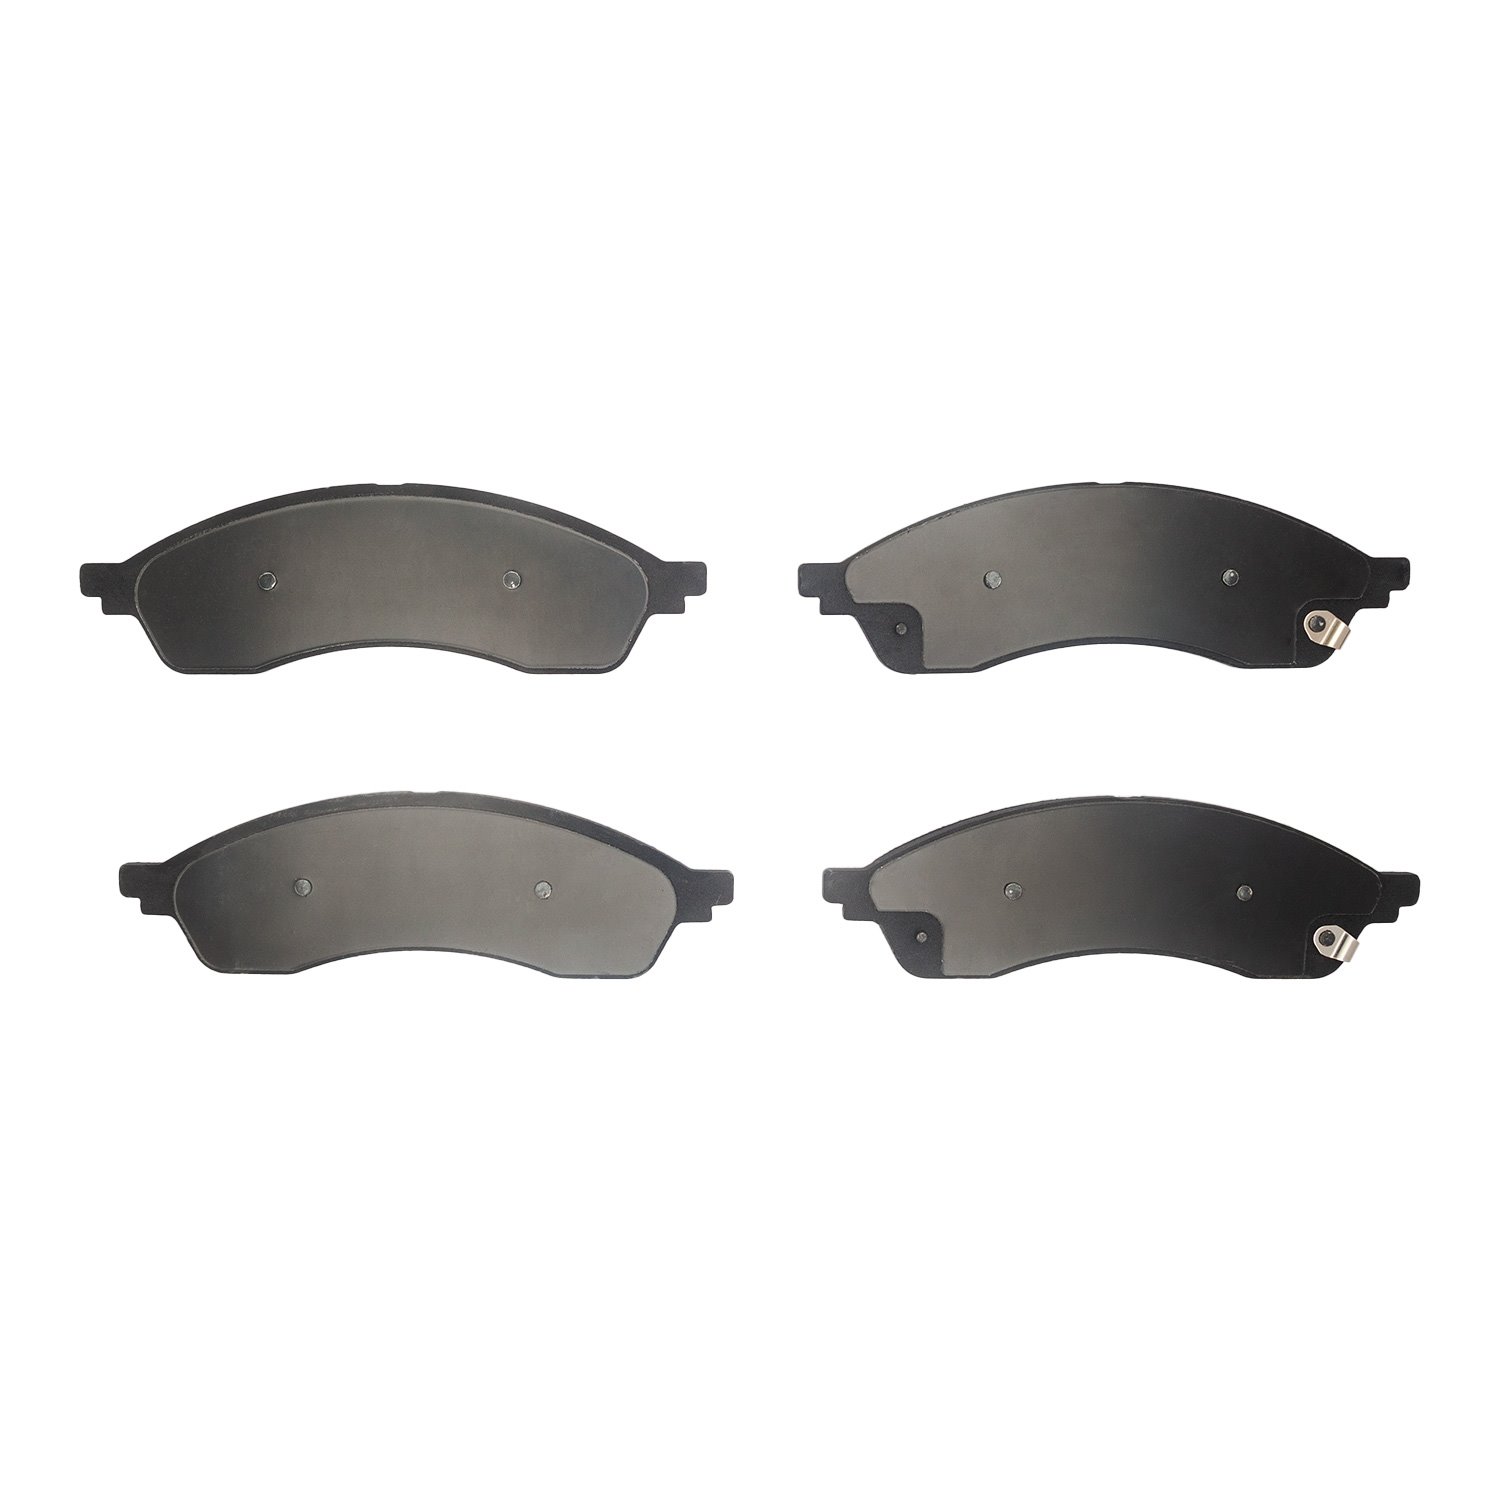 1551-2427-00 5000 Advanced Ceramic Brake Pads, Fits Select Ford/Lincoln/Mercury/Mazda, Position: Front